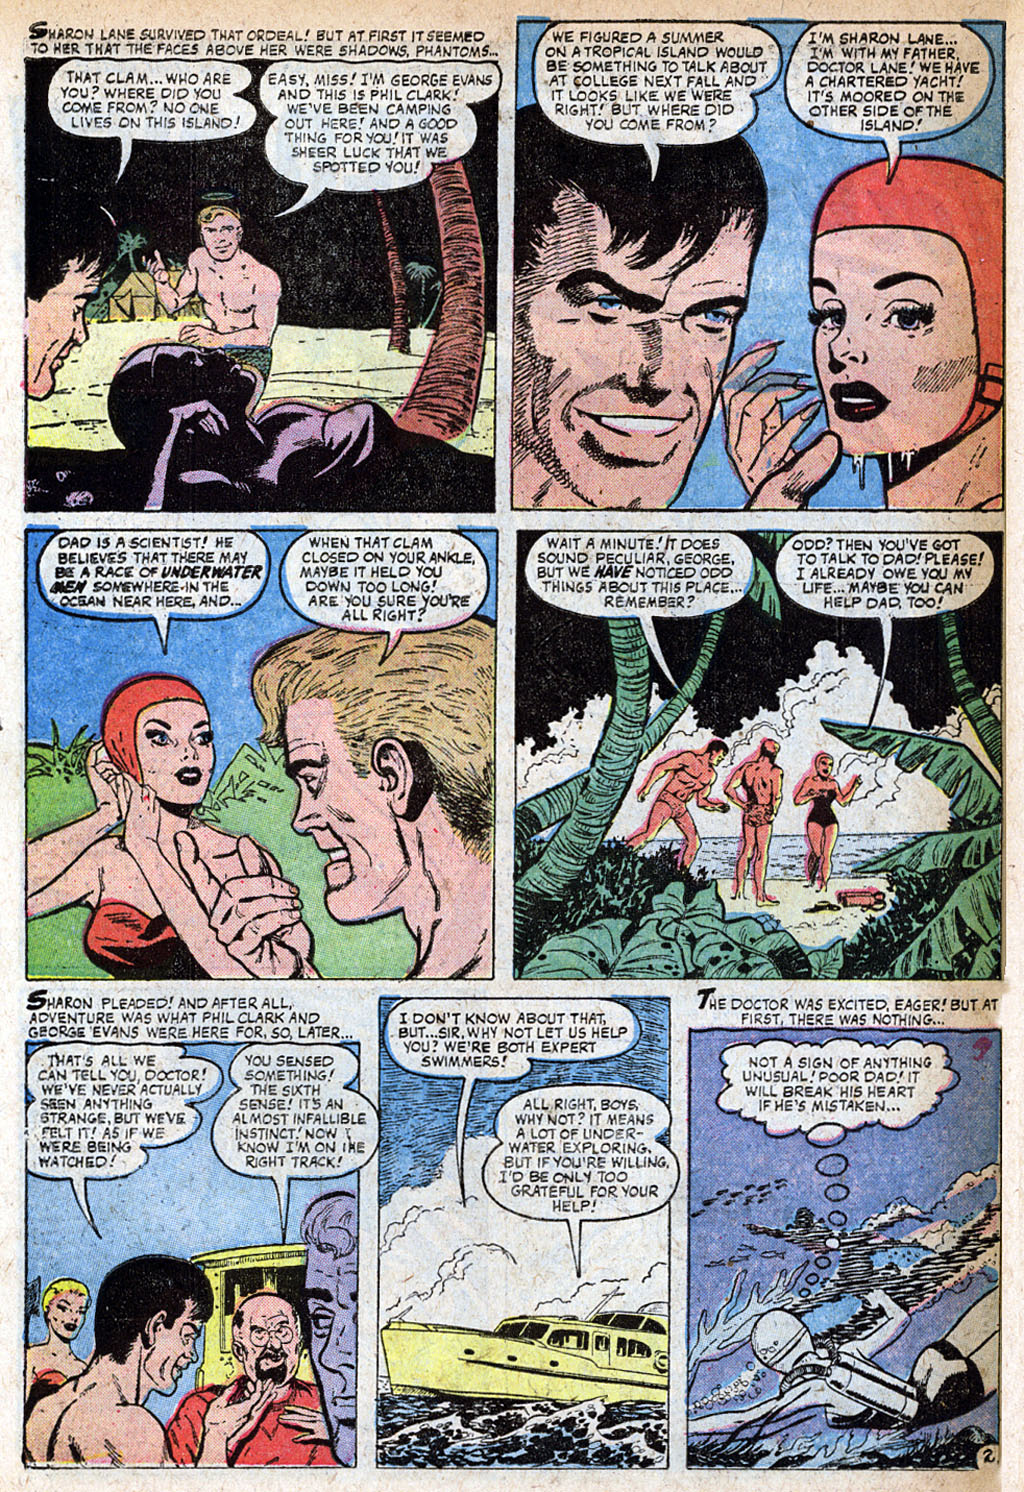 Marvel Tales (1949) 156 Page 29